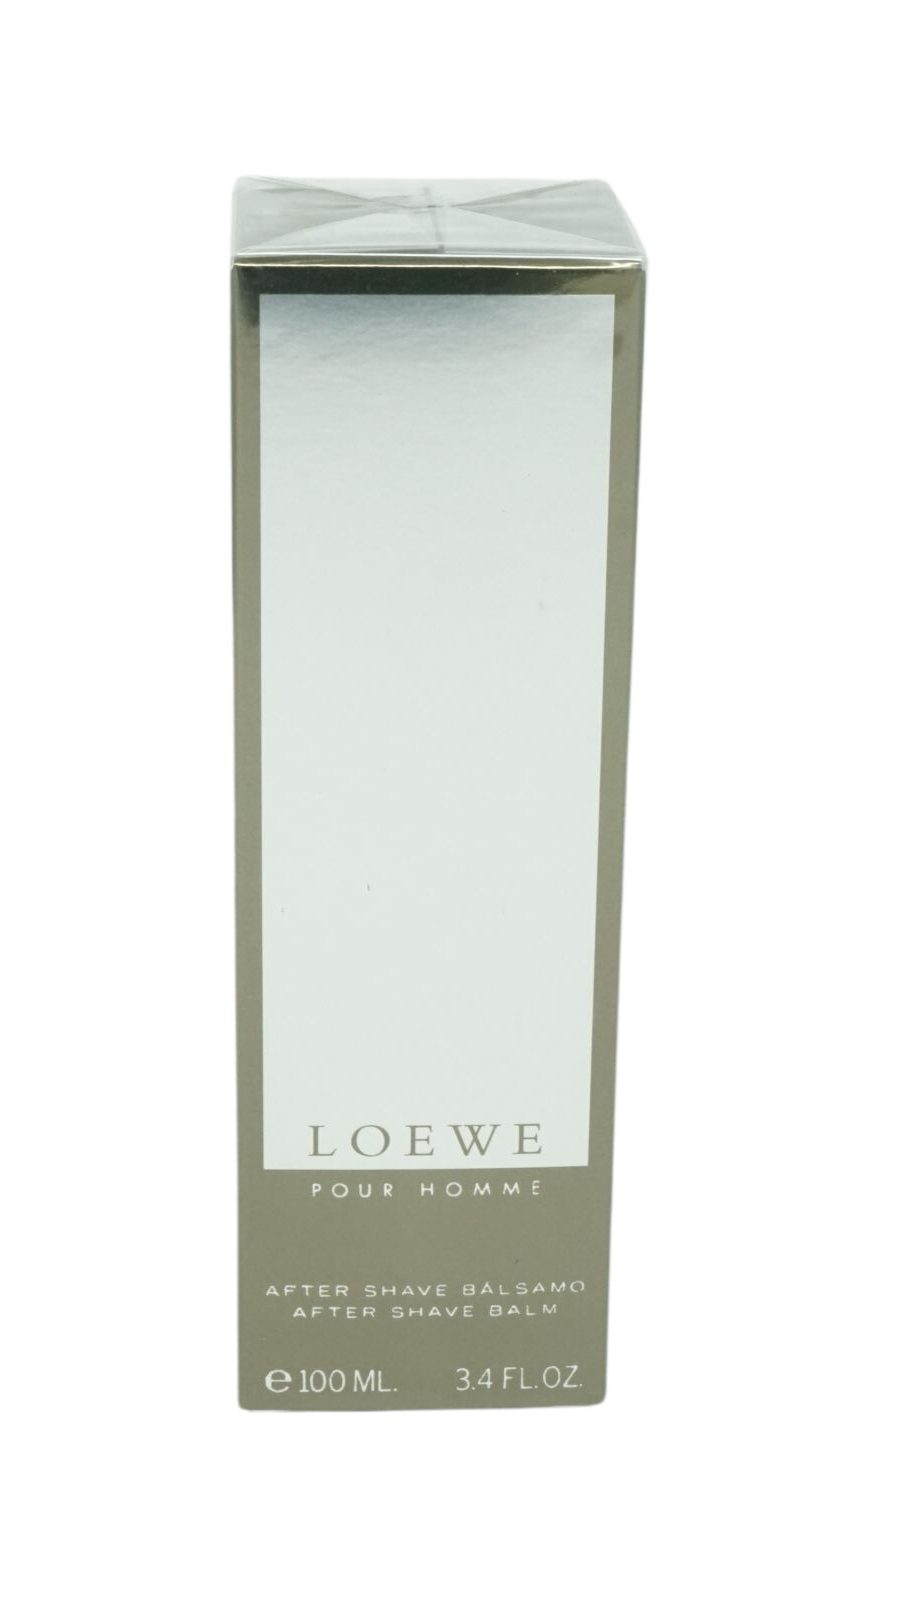 Balsam Loewe Pour Balm Homme Loewe 100ml After-Shave Shave After